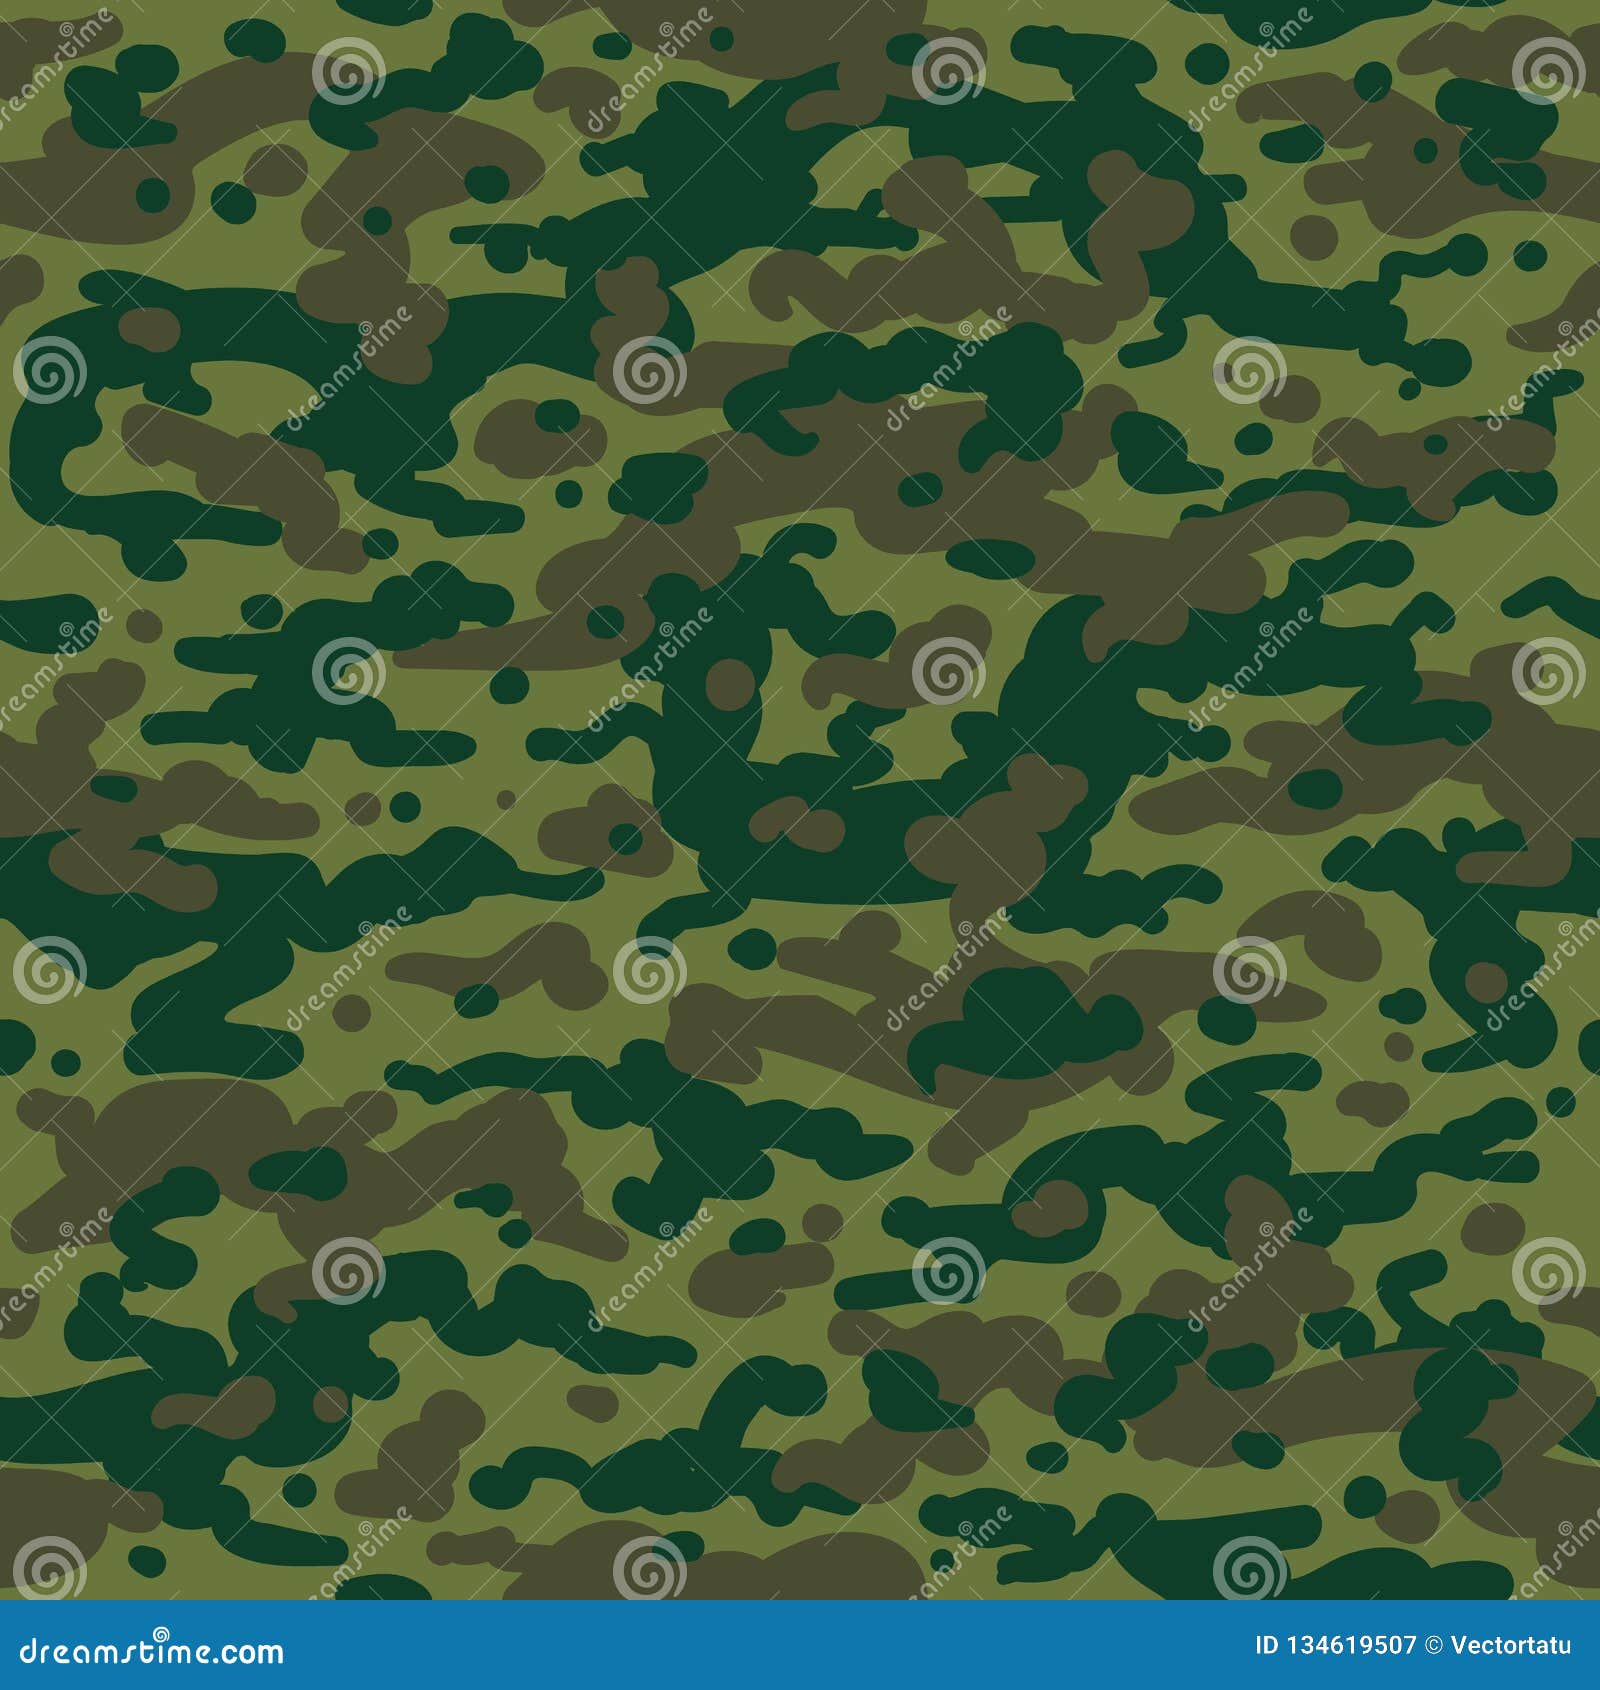 Hunting camouflage pattern stock vector. Illustration of classic ...